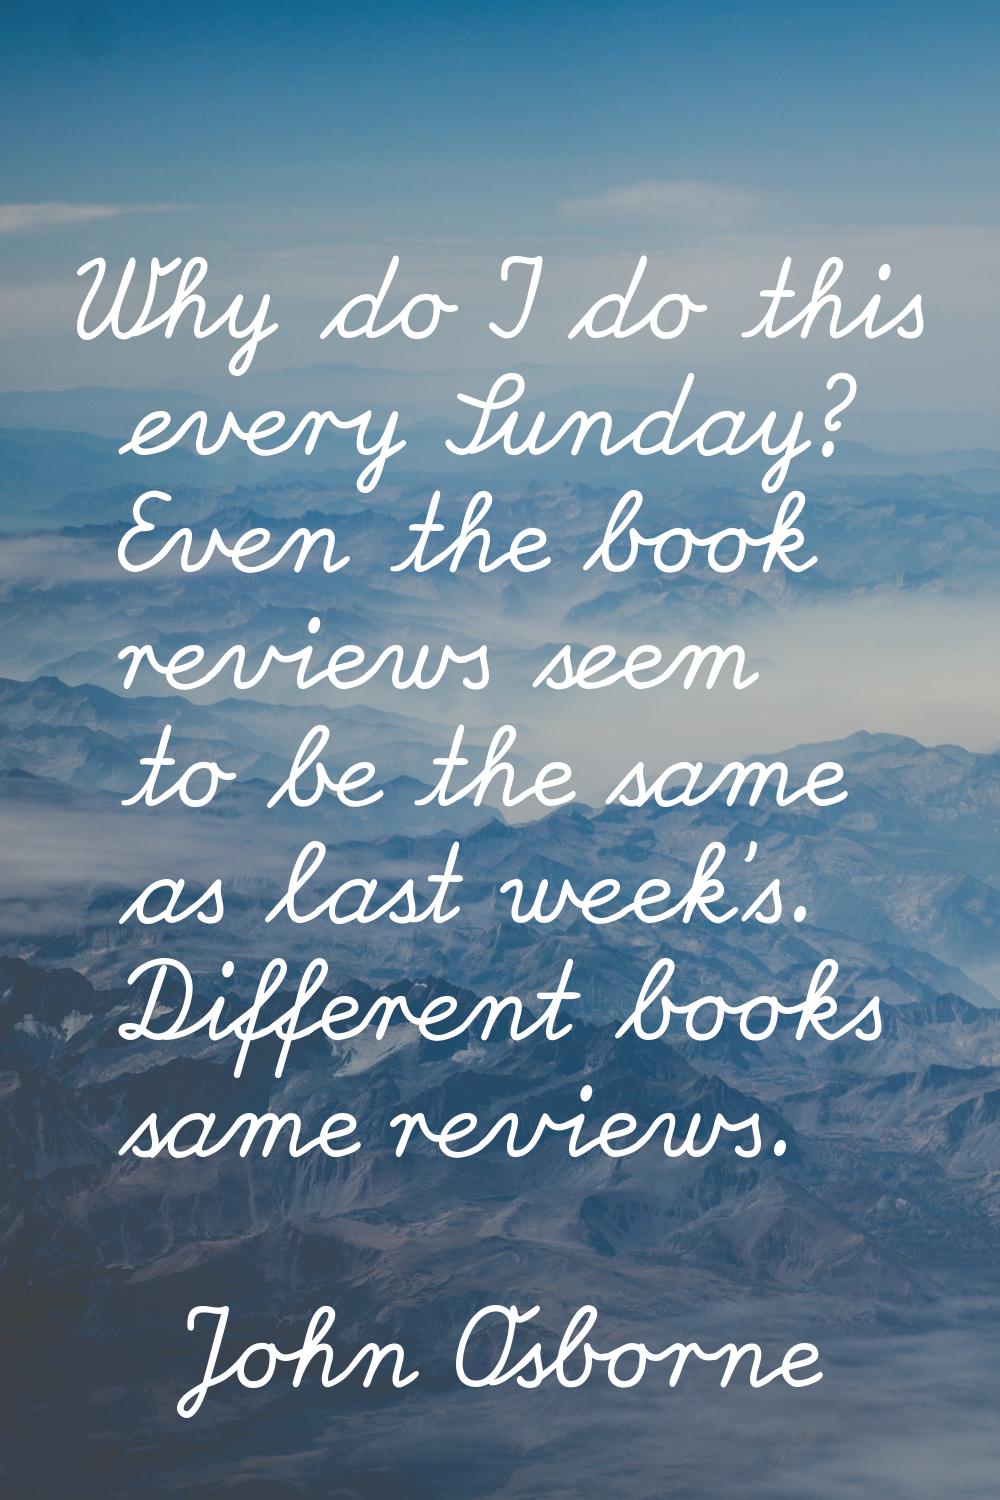 Why do I do this every Sunday? Even the book reviews seem to be the same as last week's. Different 